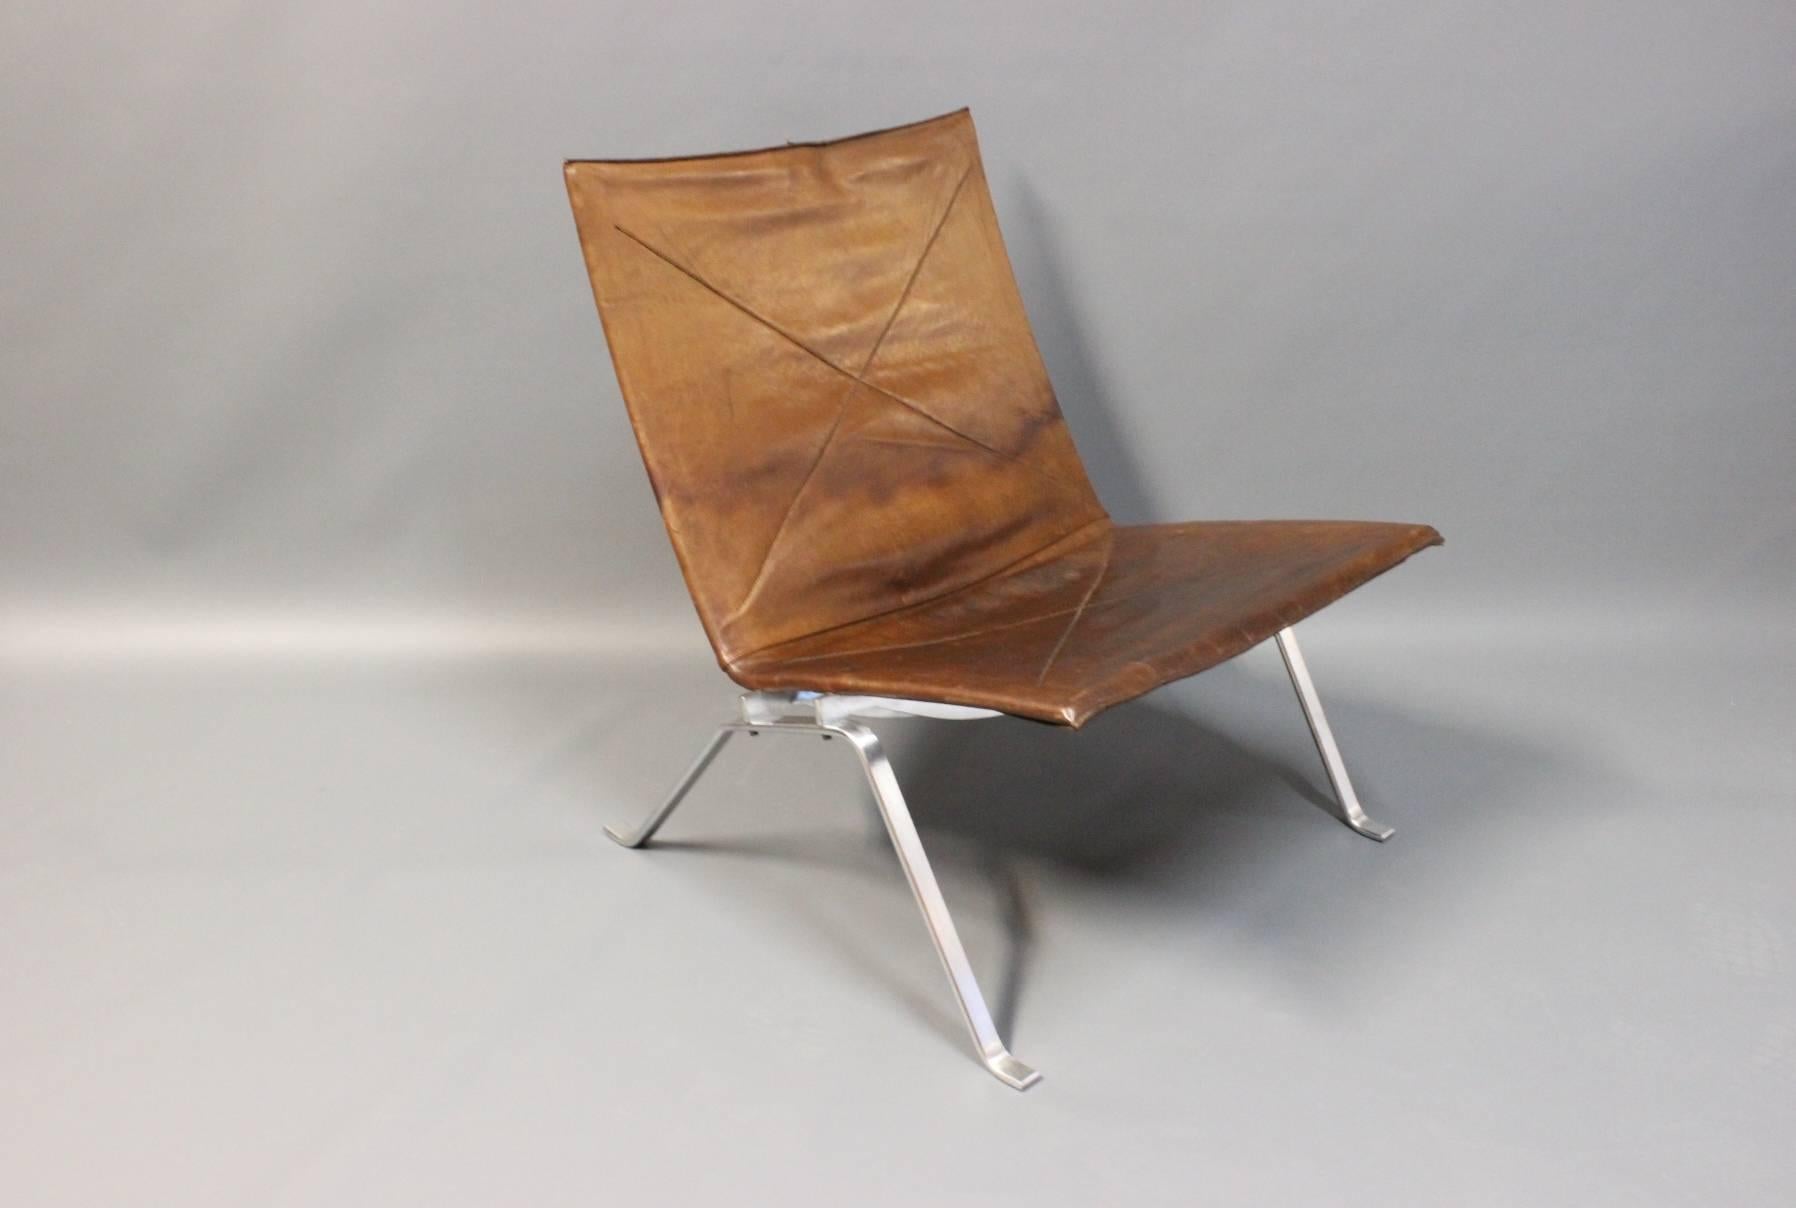 Easy Chair, model PK22, in original patinated leather and brushed steel designed by Poul Kjærholm in 1956 and manufactured by E. Kold Christensen c. 1960. 